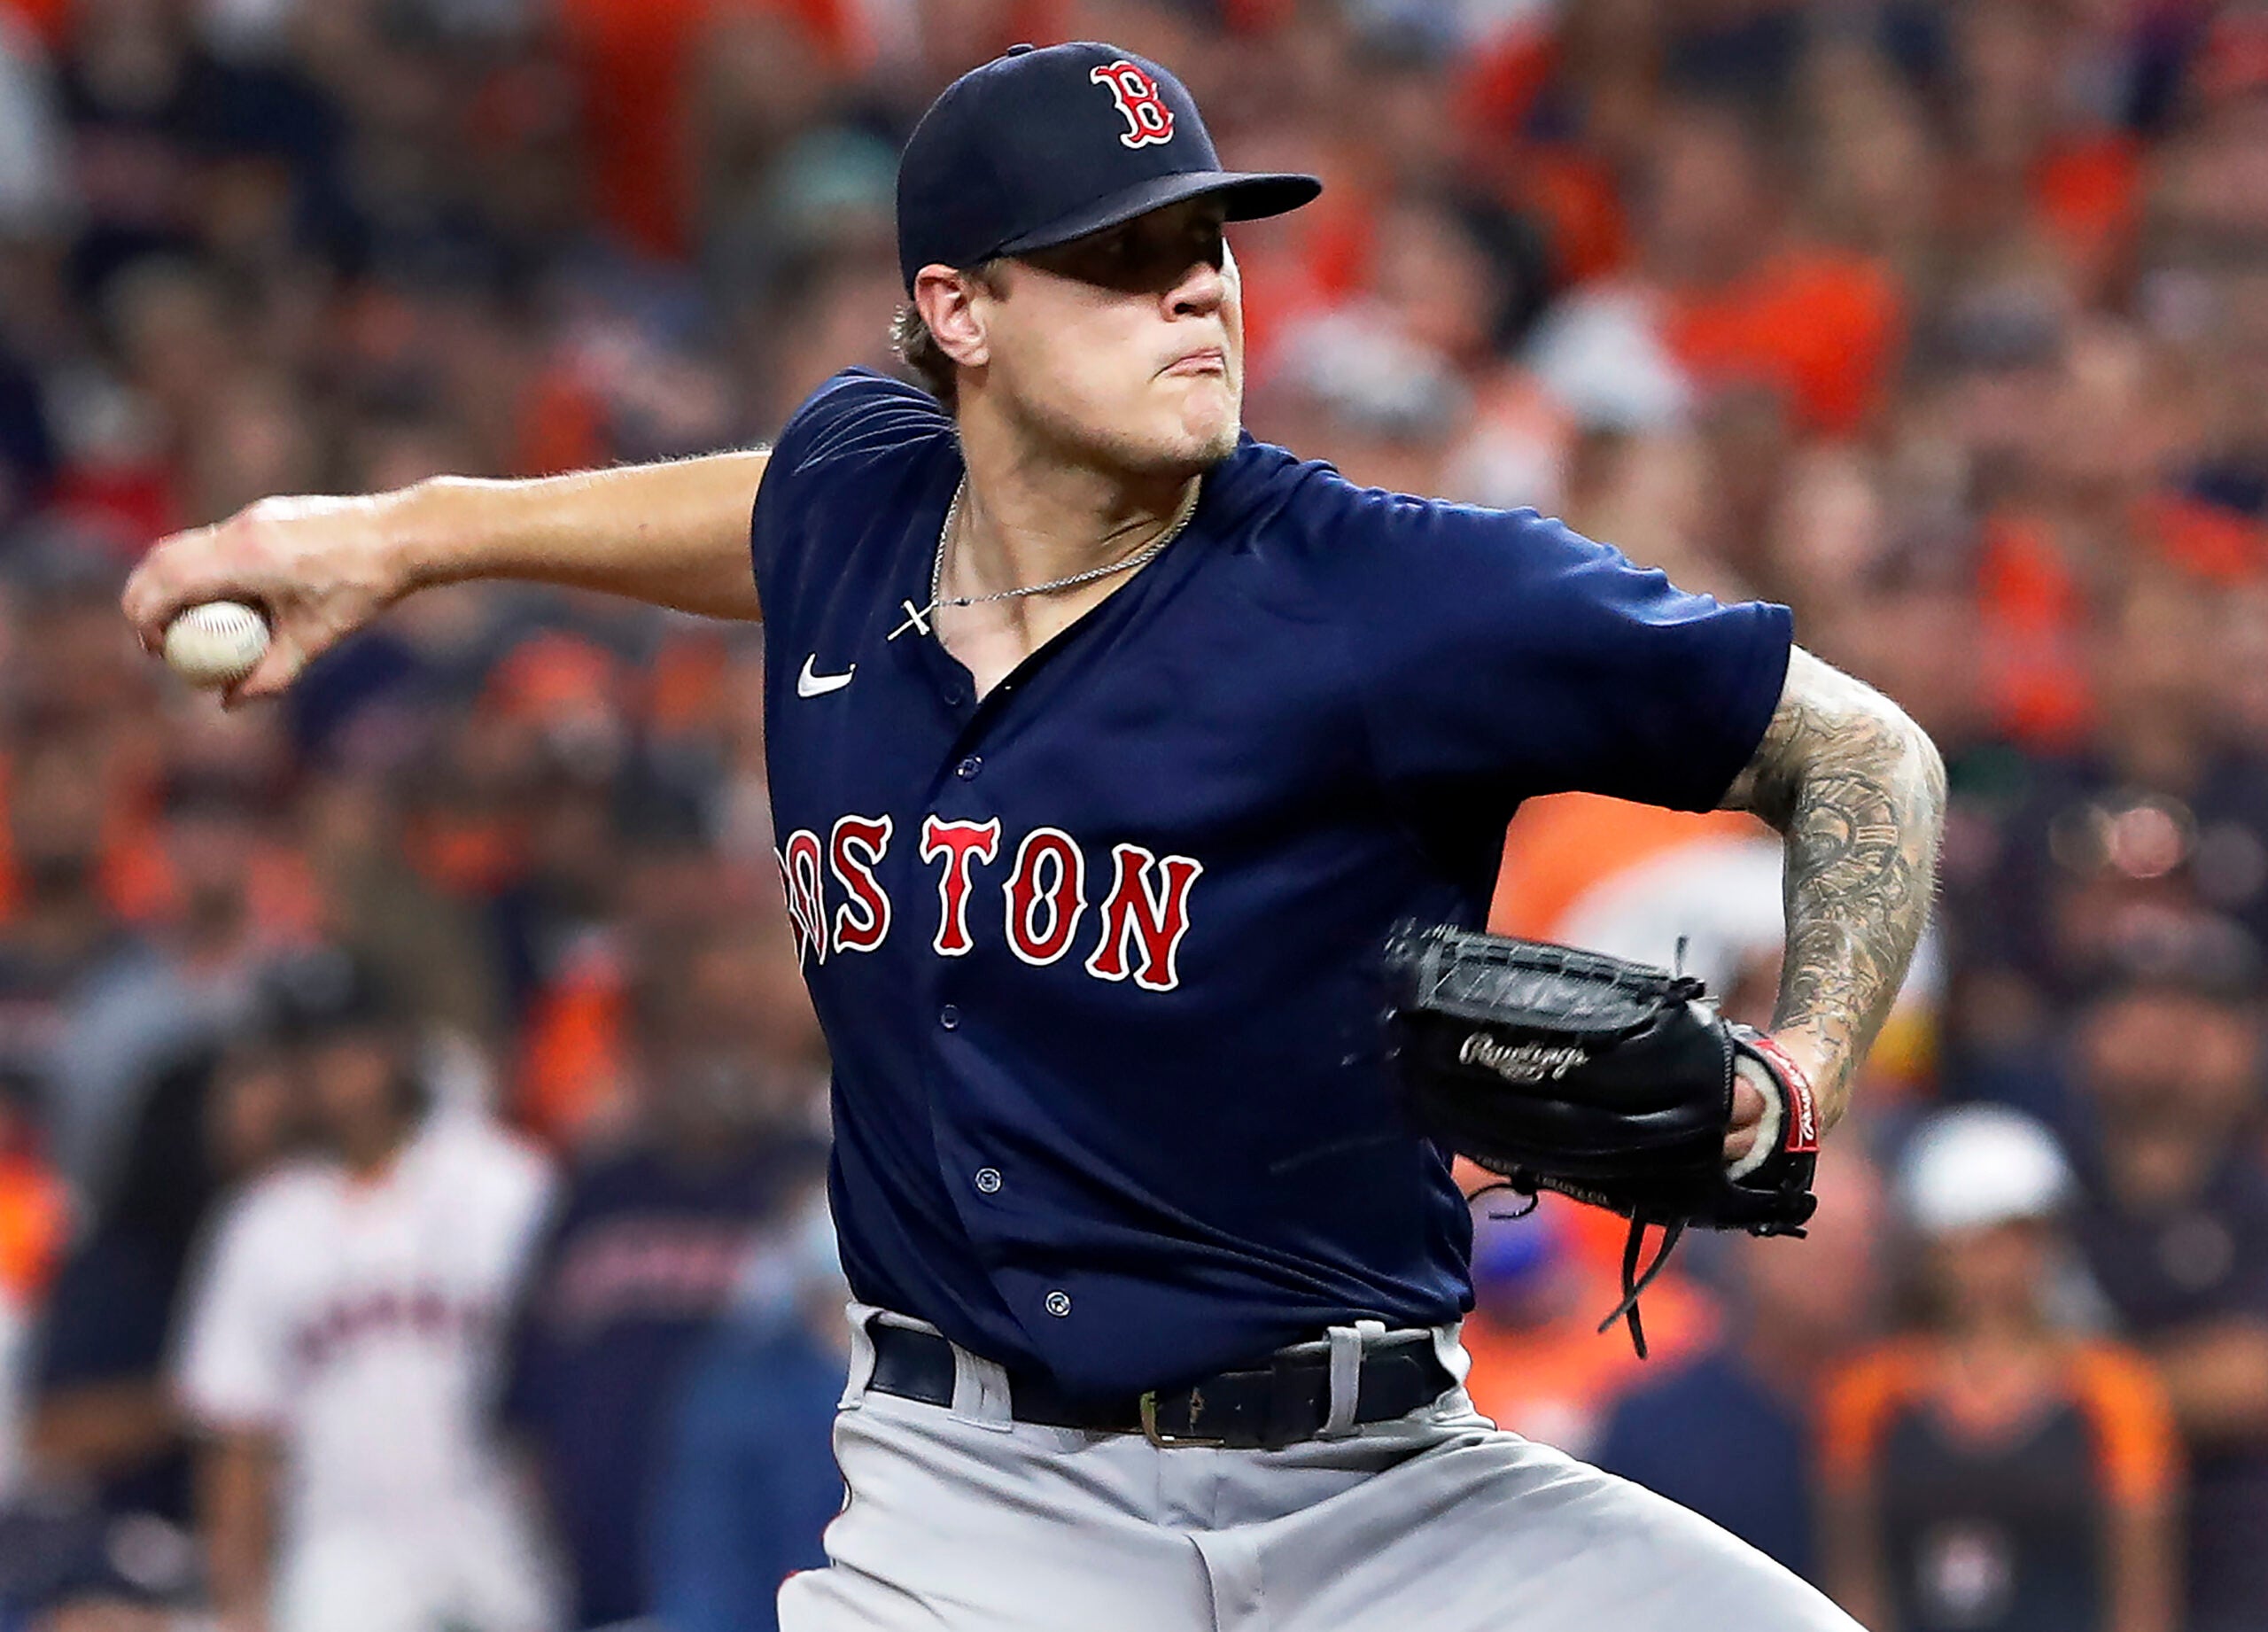 Tanner Houck explains why he has the Red Sox logo tattooed on his spine